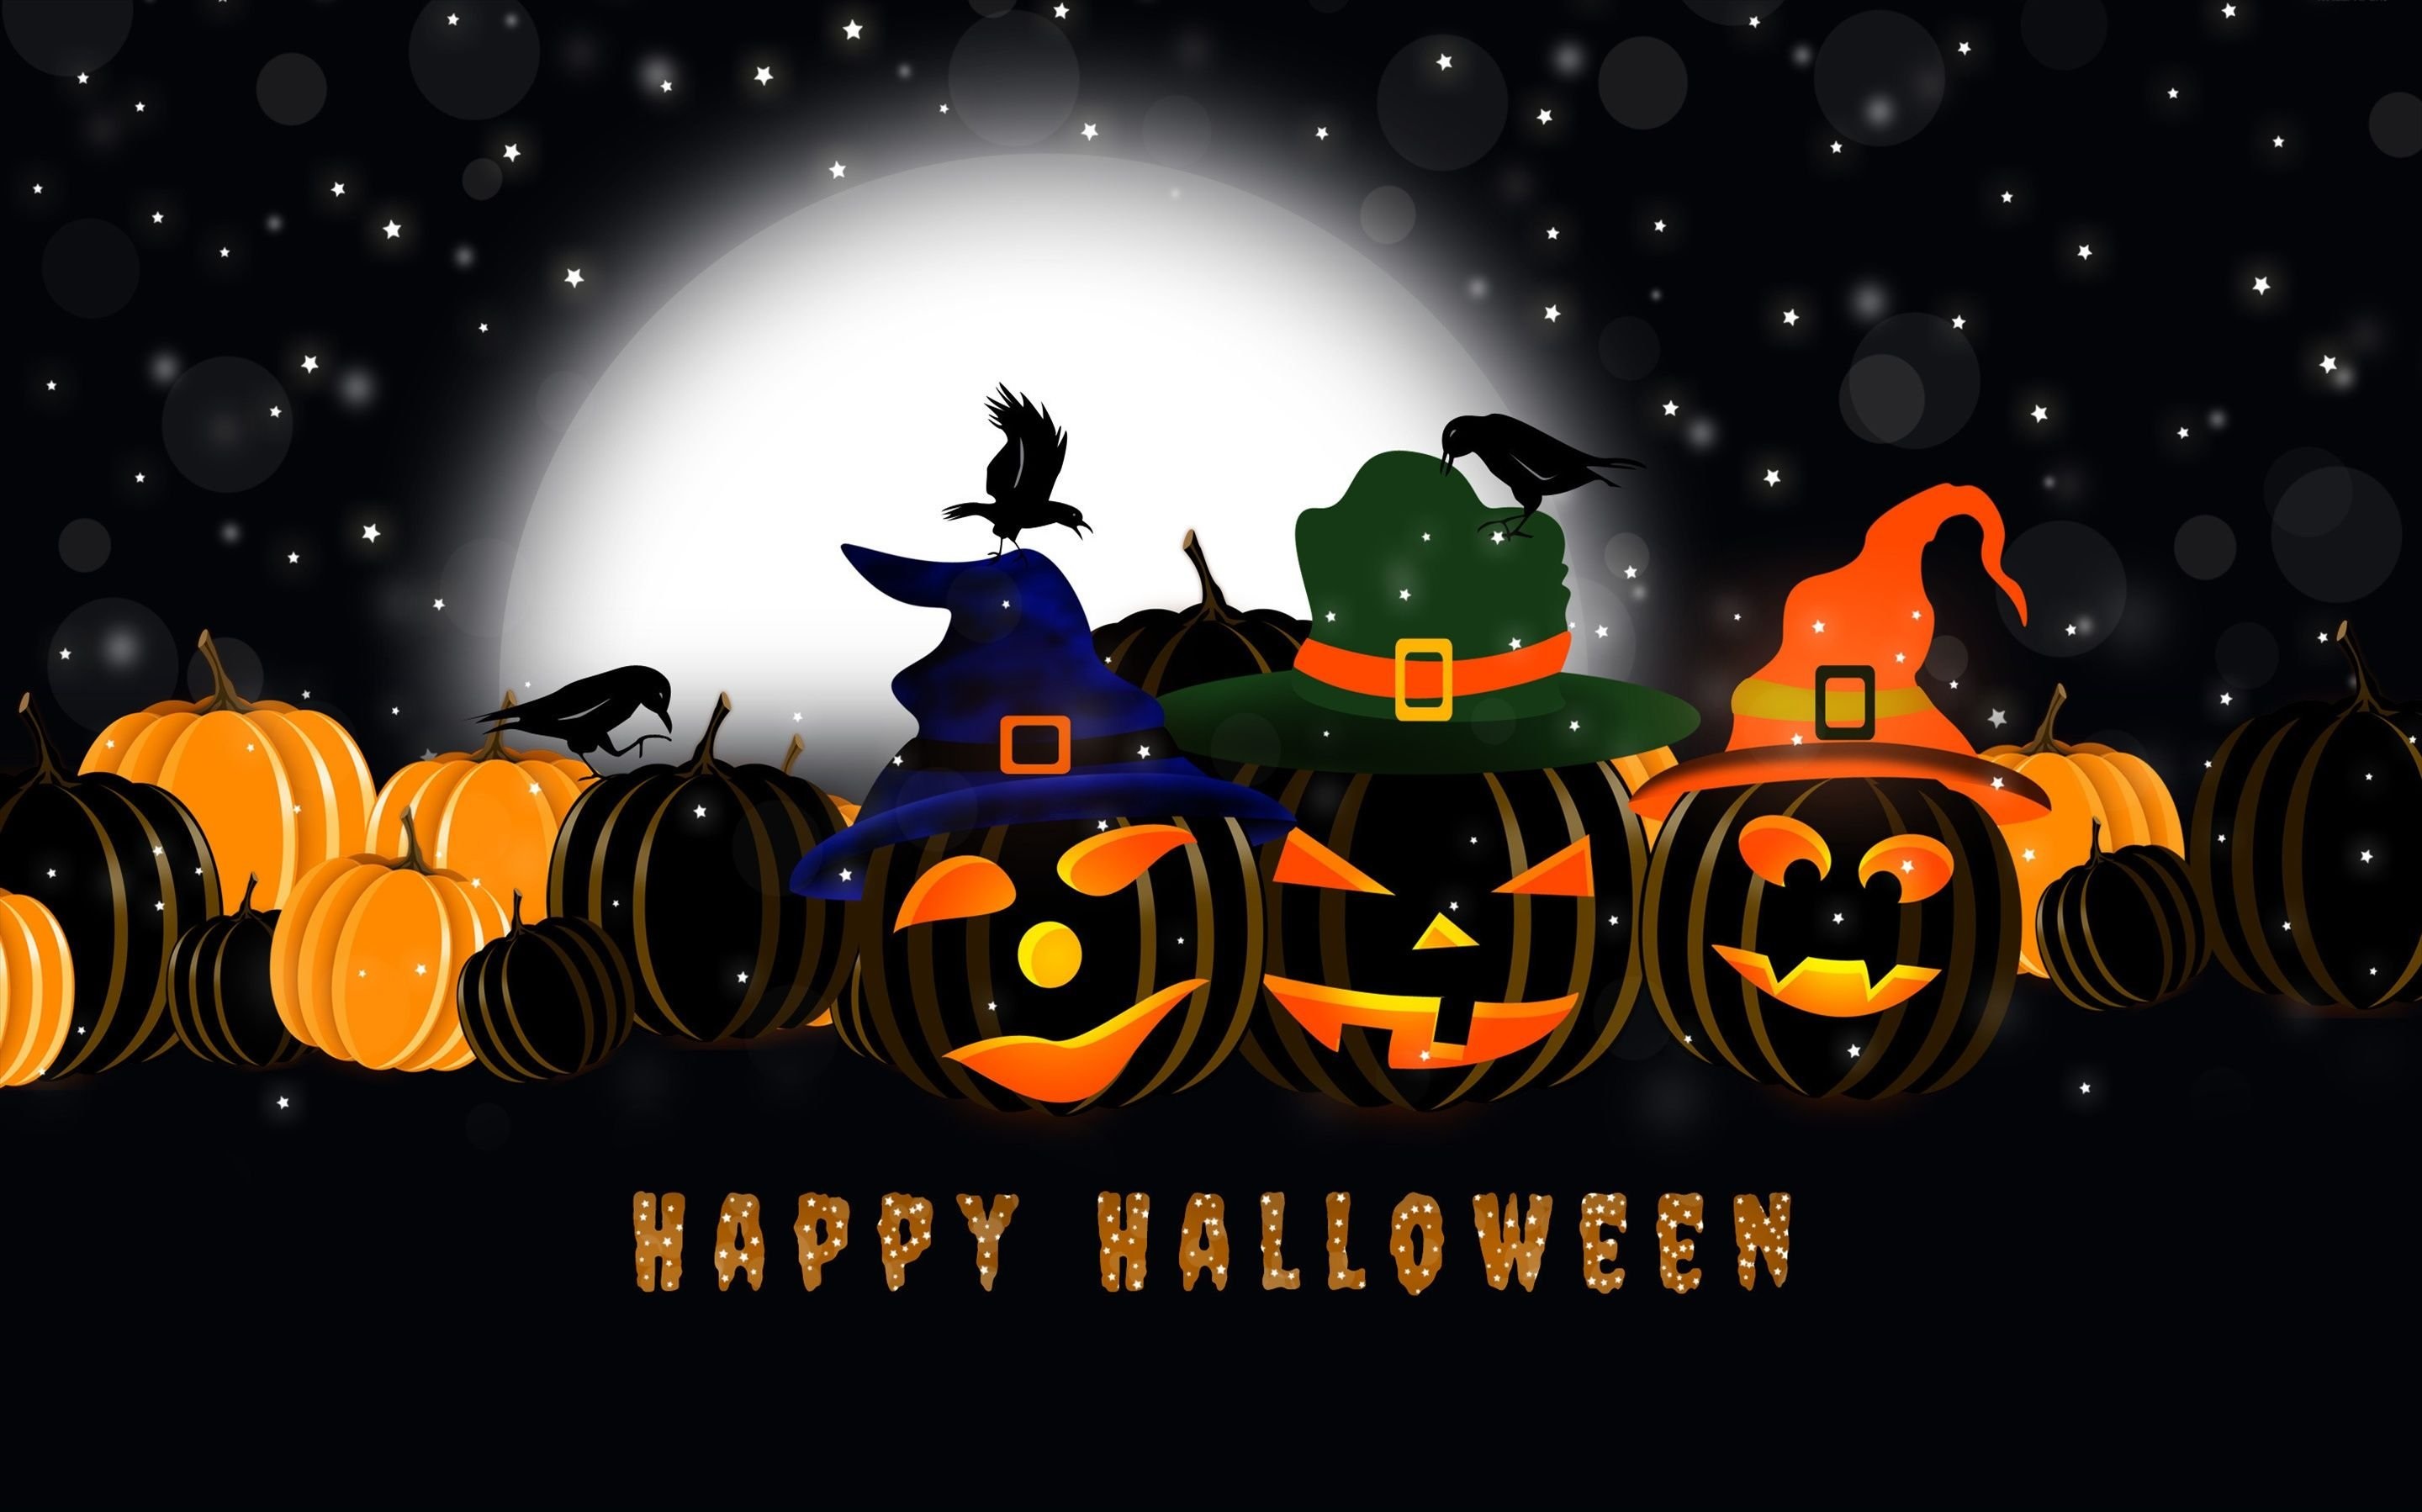 The best free Halloween wallpapers and backgrounds, from scary to fun, to download for your computer, tablet, phone, or use for social media.